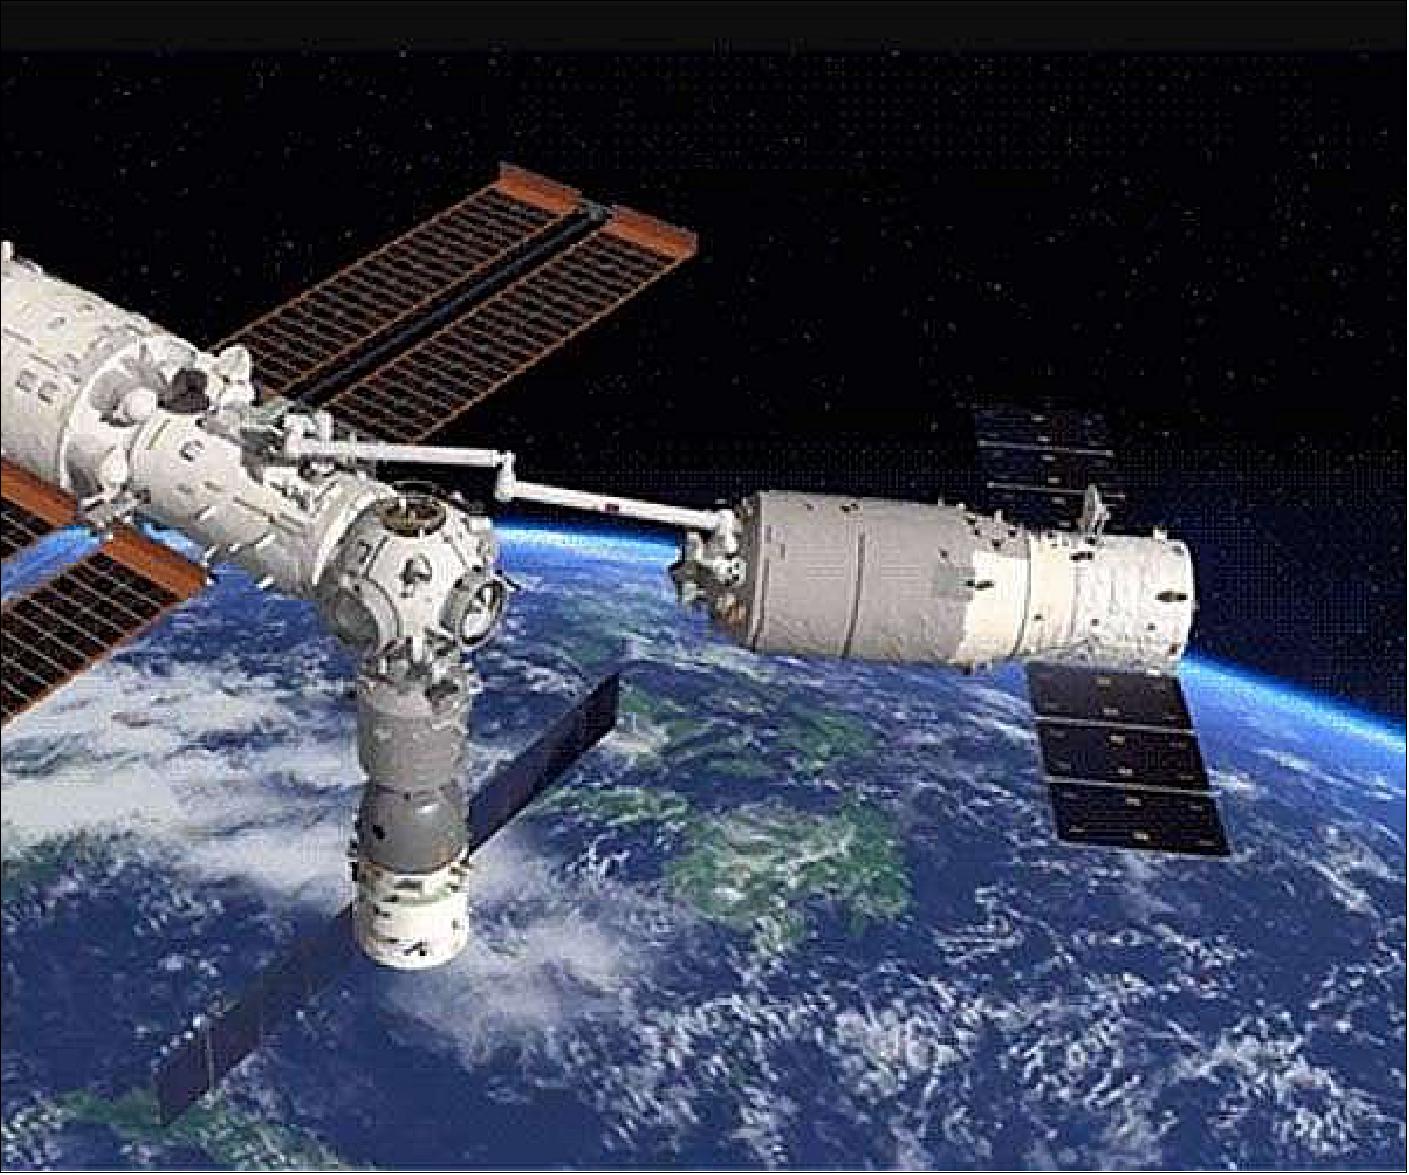 Figure 5: China's Tiangong space station conducted a test using its robotic arm to reposition the Tianzhou 2 cargo spaceship (image credit: CSU)